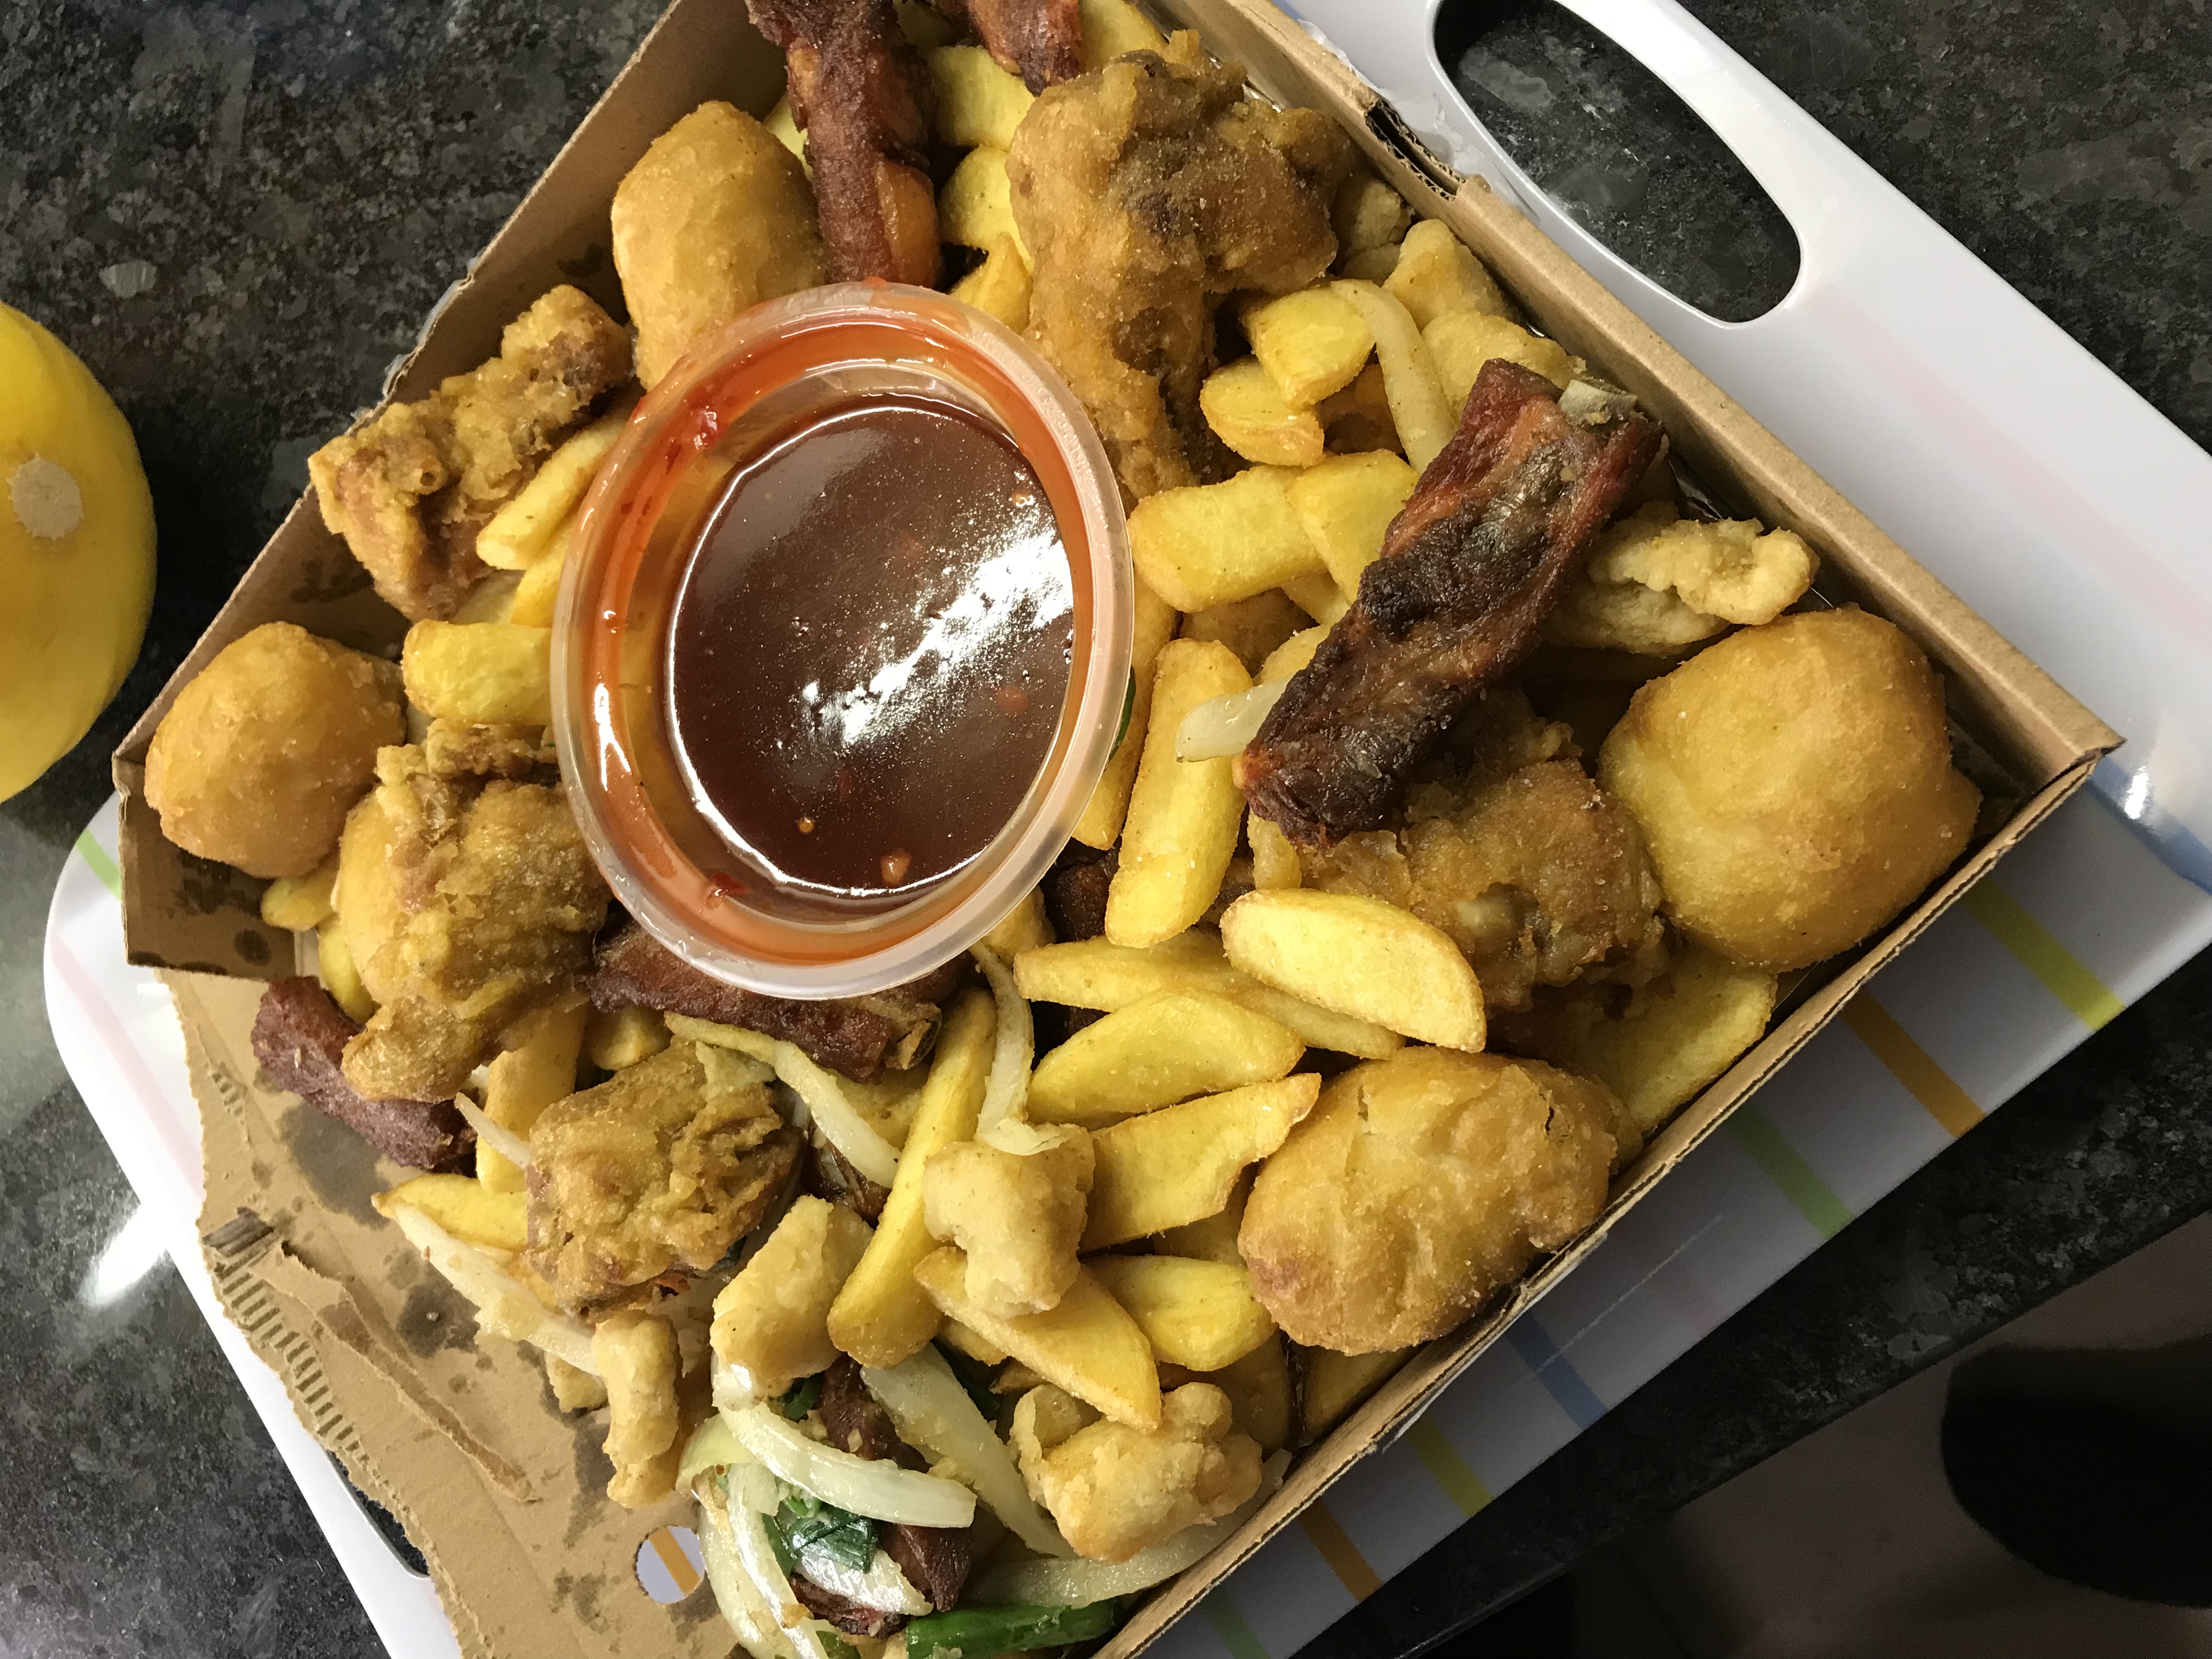 Dirty Takeaway Pictures Volume 3 - Page 279 - Food, Drink & Restaurants - PistonHeads